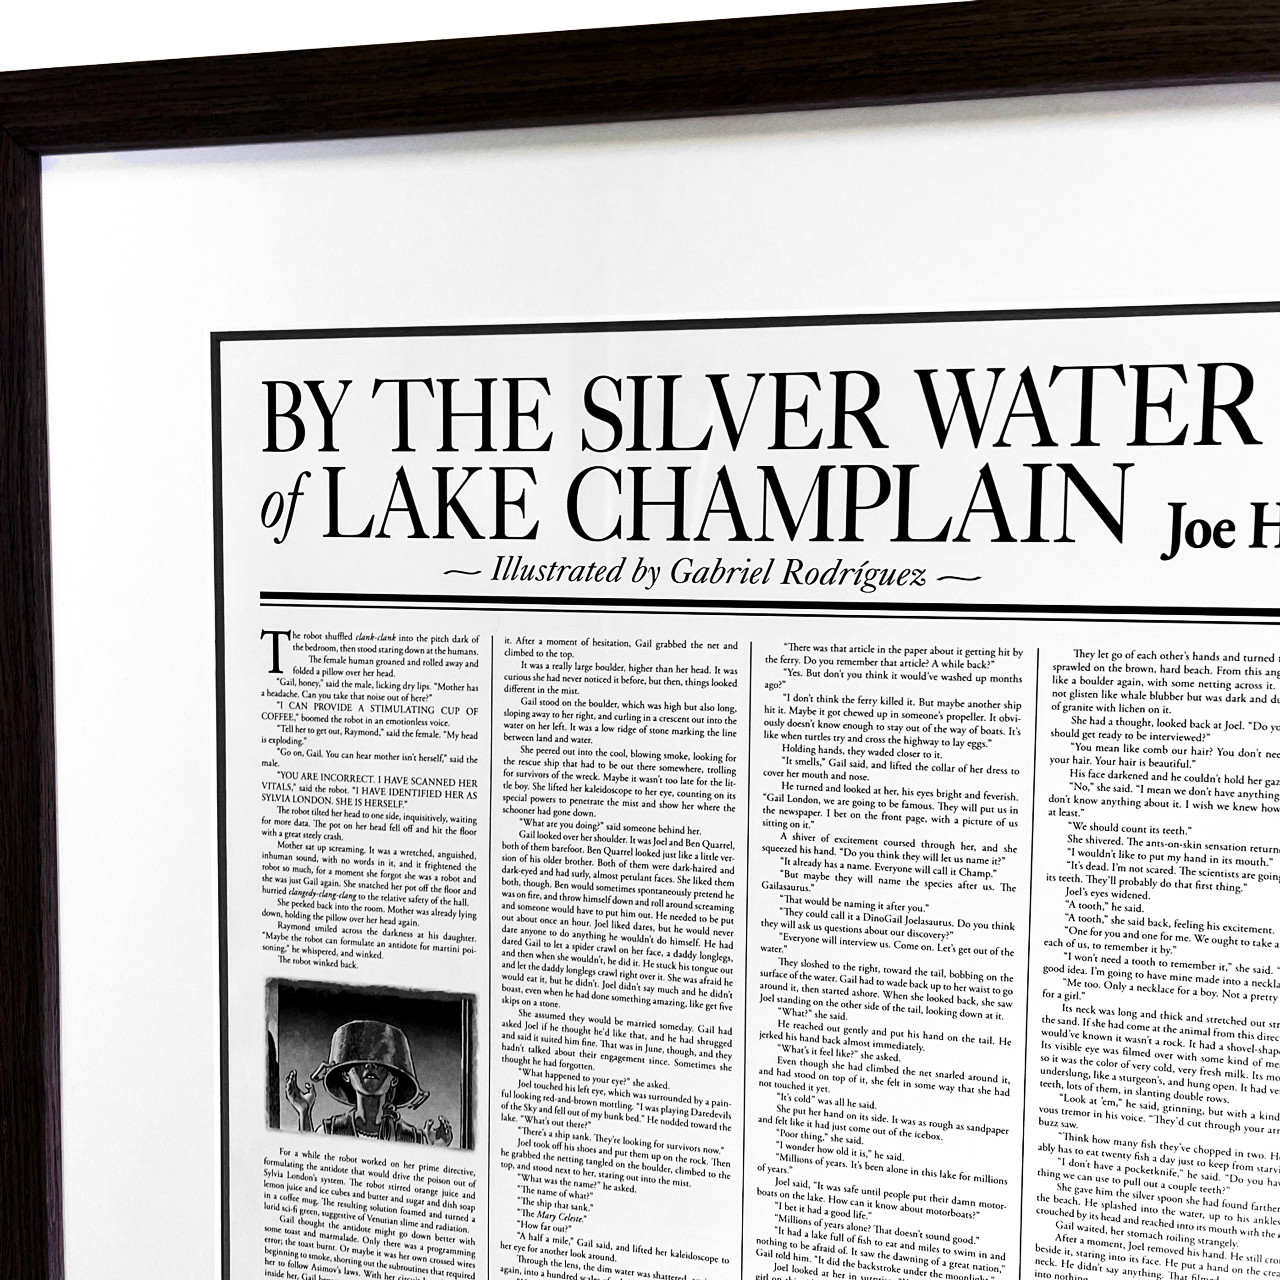 Joe Hill "By The Silver Water of Lake Champlain" Signed Limited Edition No. 53 of 224, Professional Double-Matte/Frame Museum Quality Glass